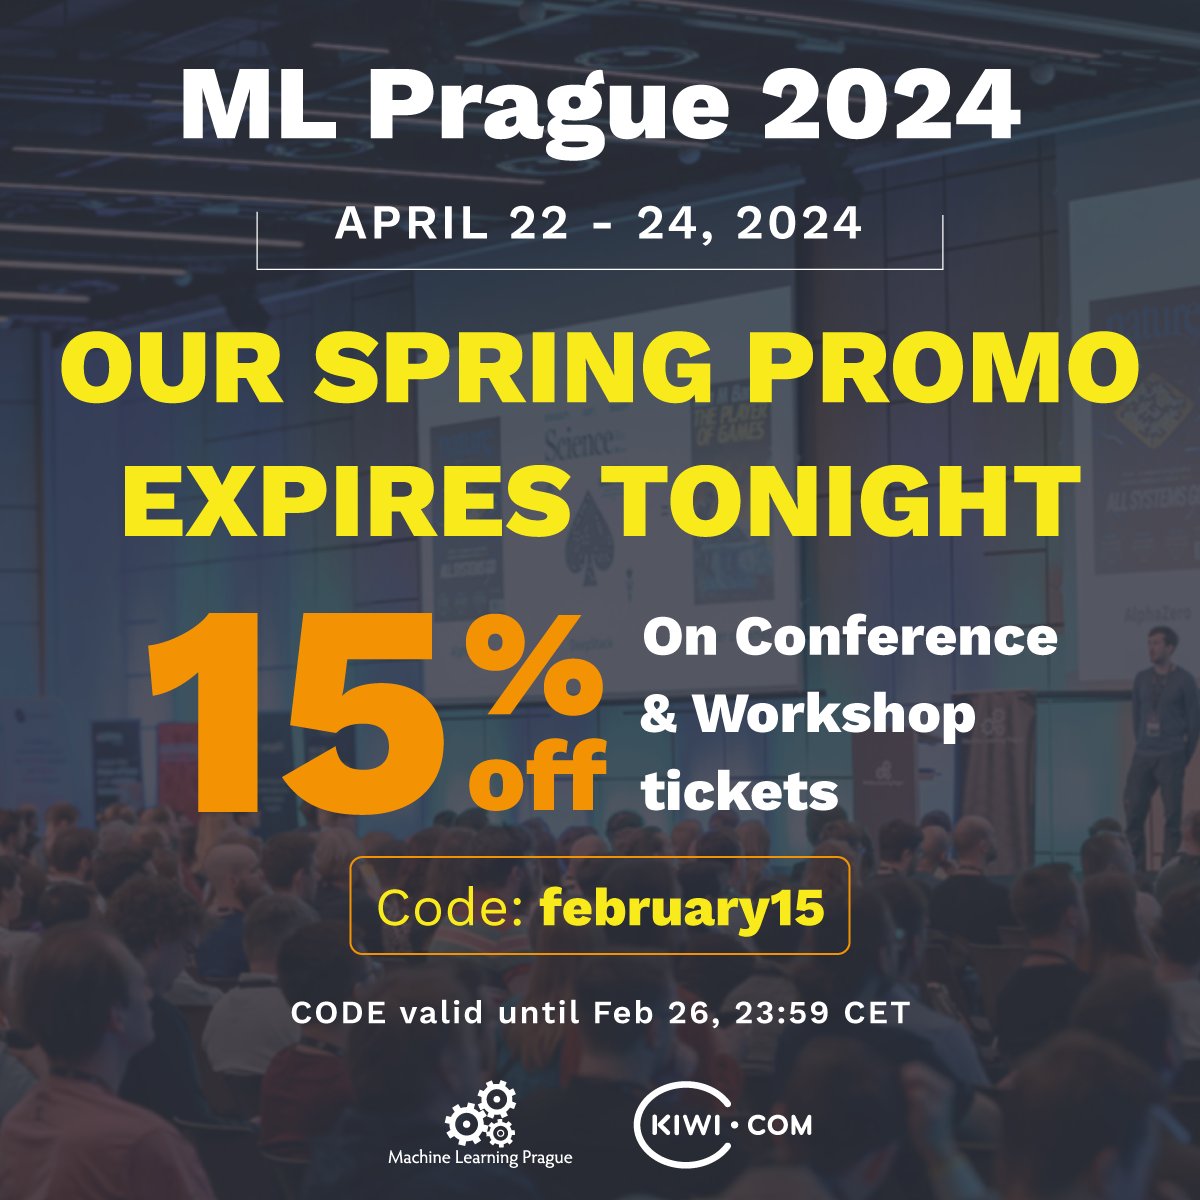 ⏳ Hurry up! Our 15% Spring Promo expires tonight ⏳ Use code 'february15' at checkout and save up to €73 on your conference, workshop, or combined tickets.

👉 Register at mlprague.com

#mlprague #mlprague2024 #machinelearning #AI #conferences2024 #conference…